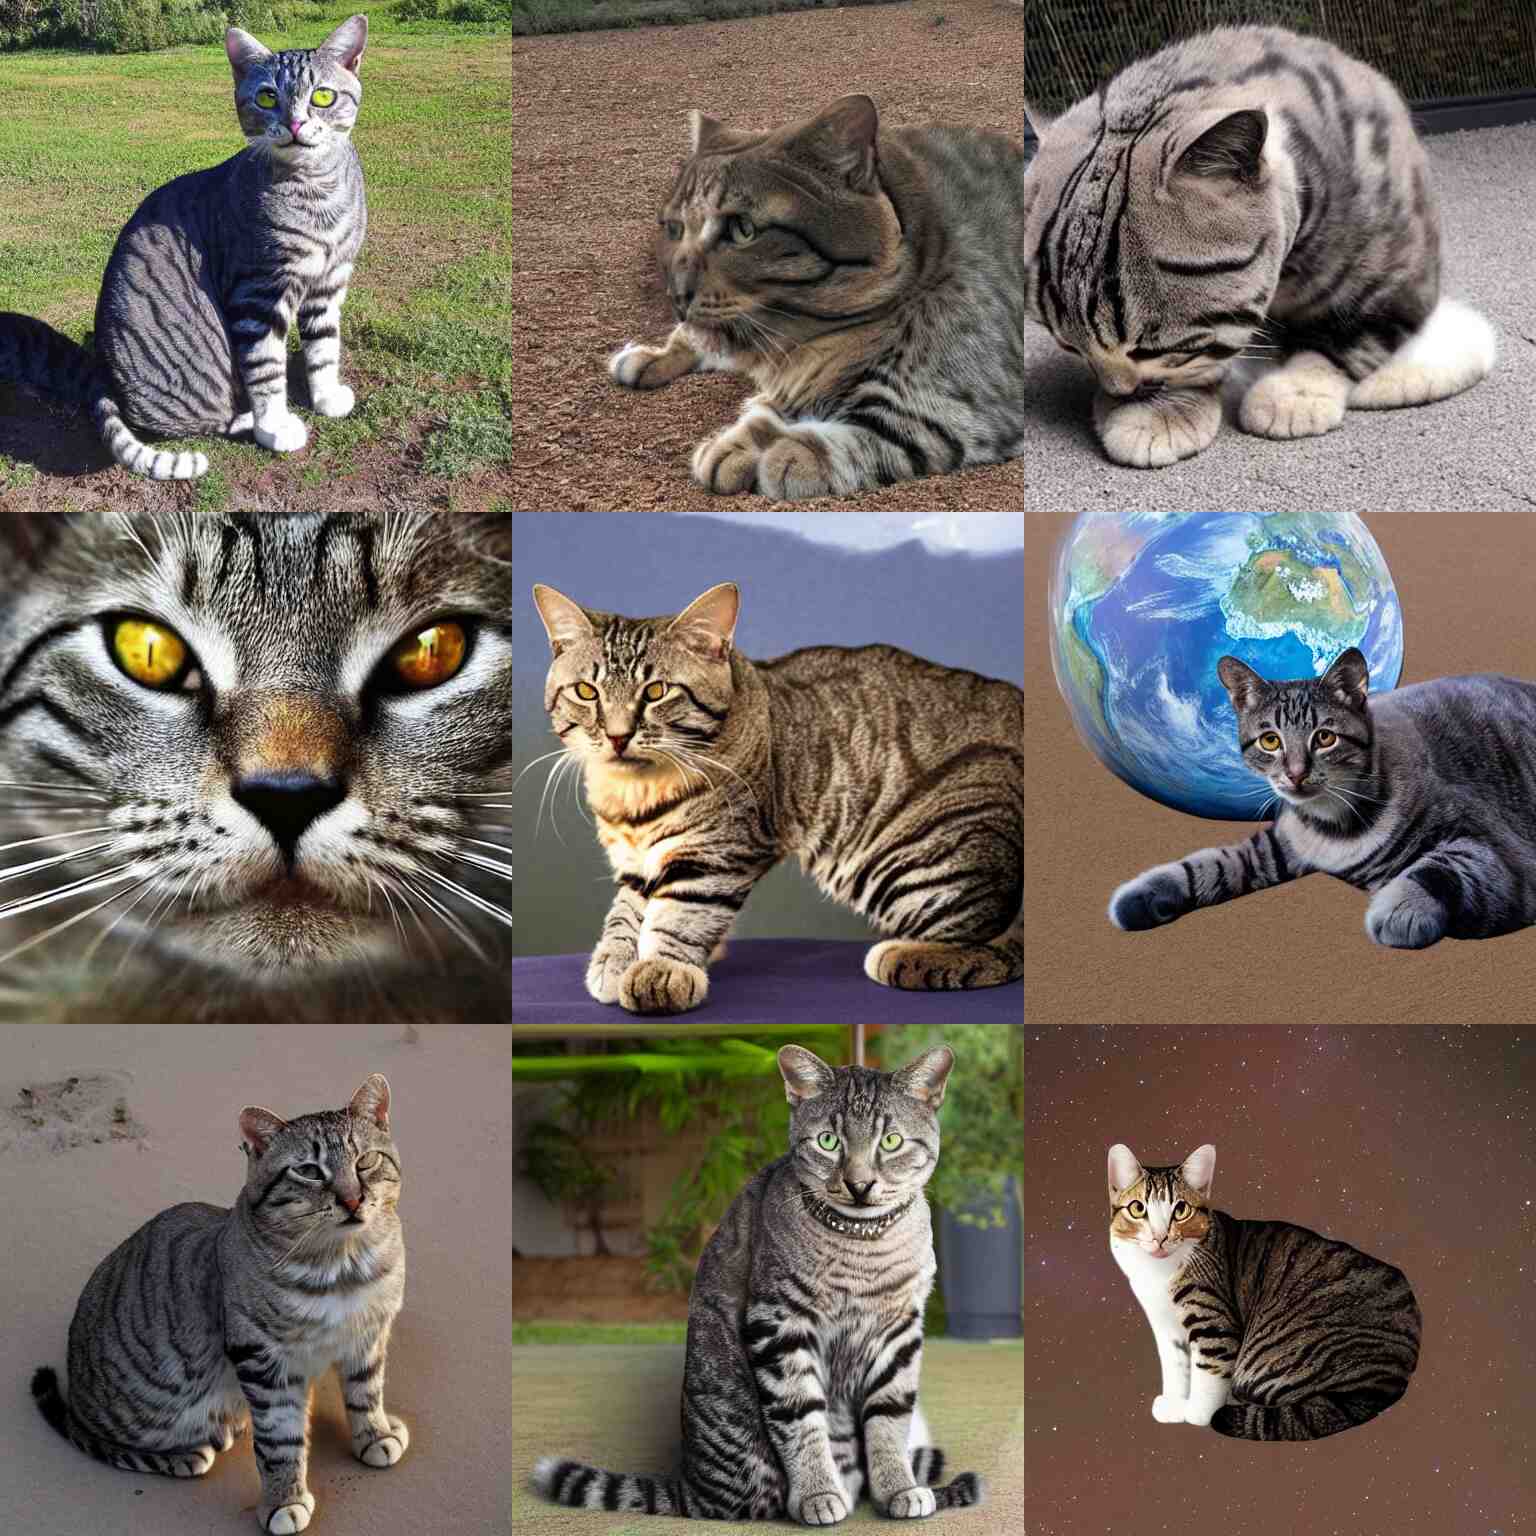 What Is The Most Accurate Cat Breed Recognition API Out There?